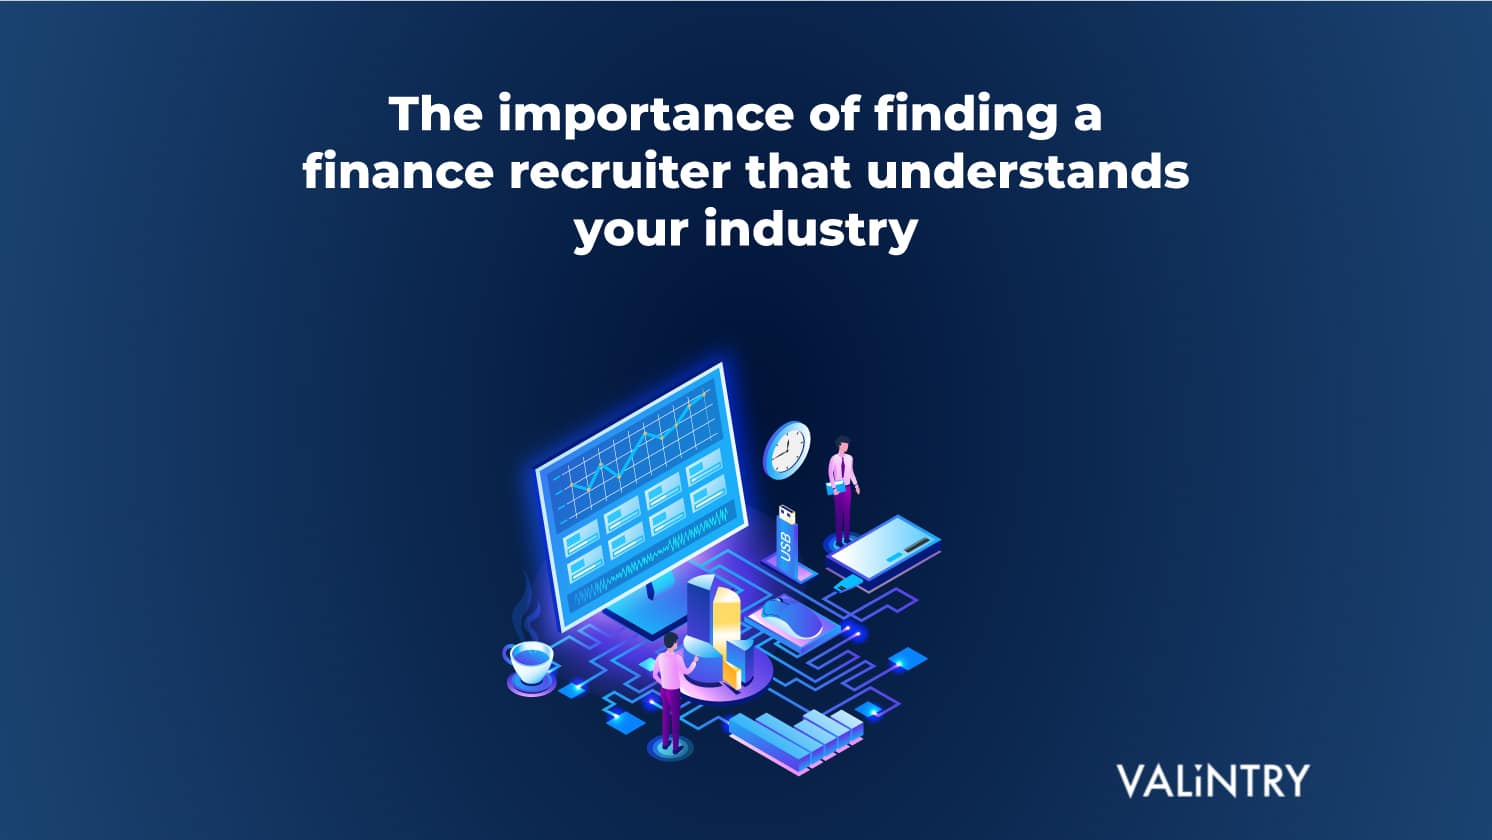 The Importance of Finding a Finance Recruiter That Understands Your Industry